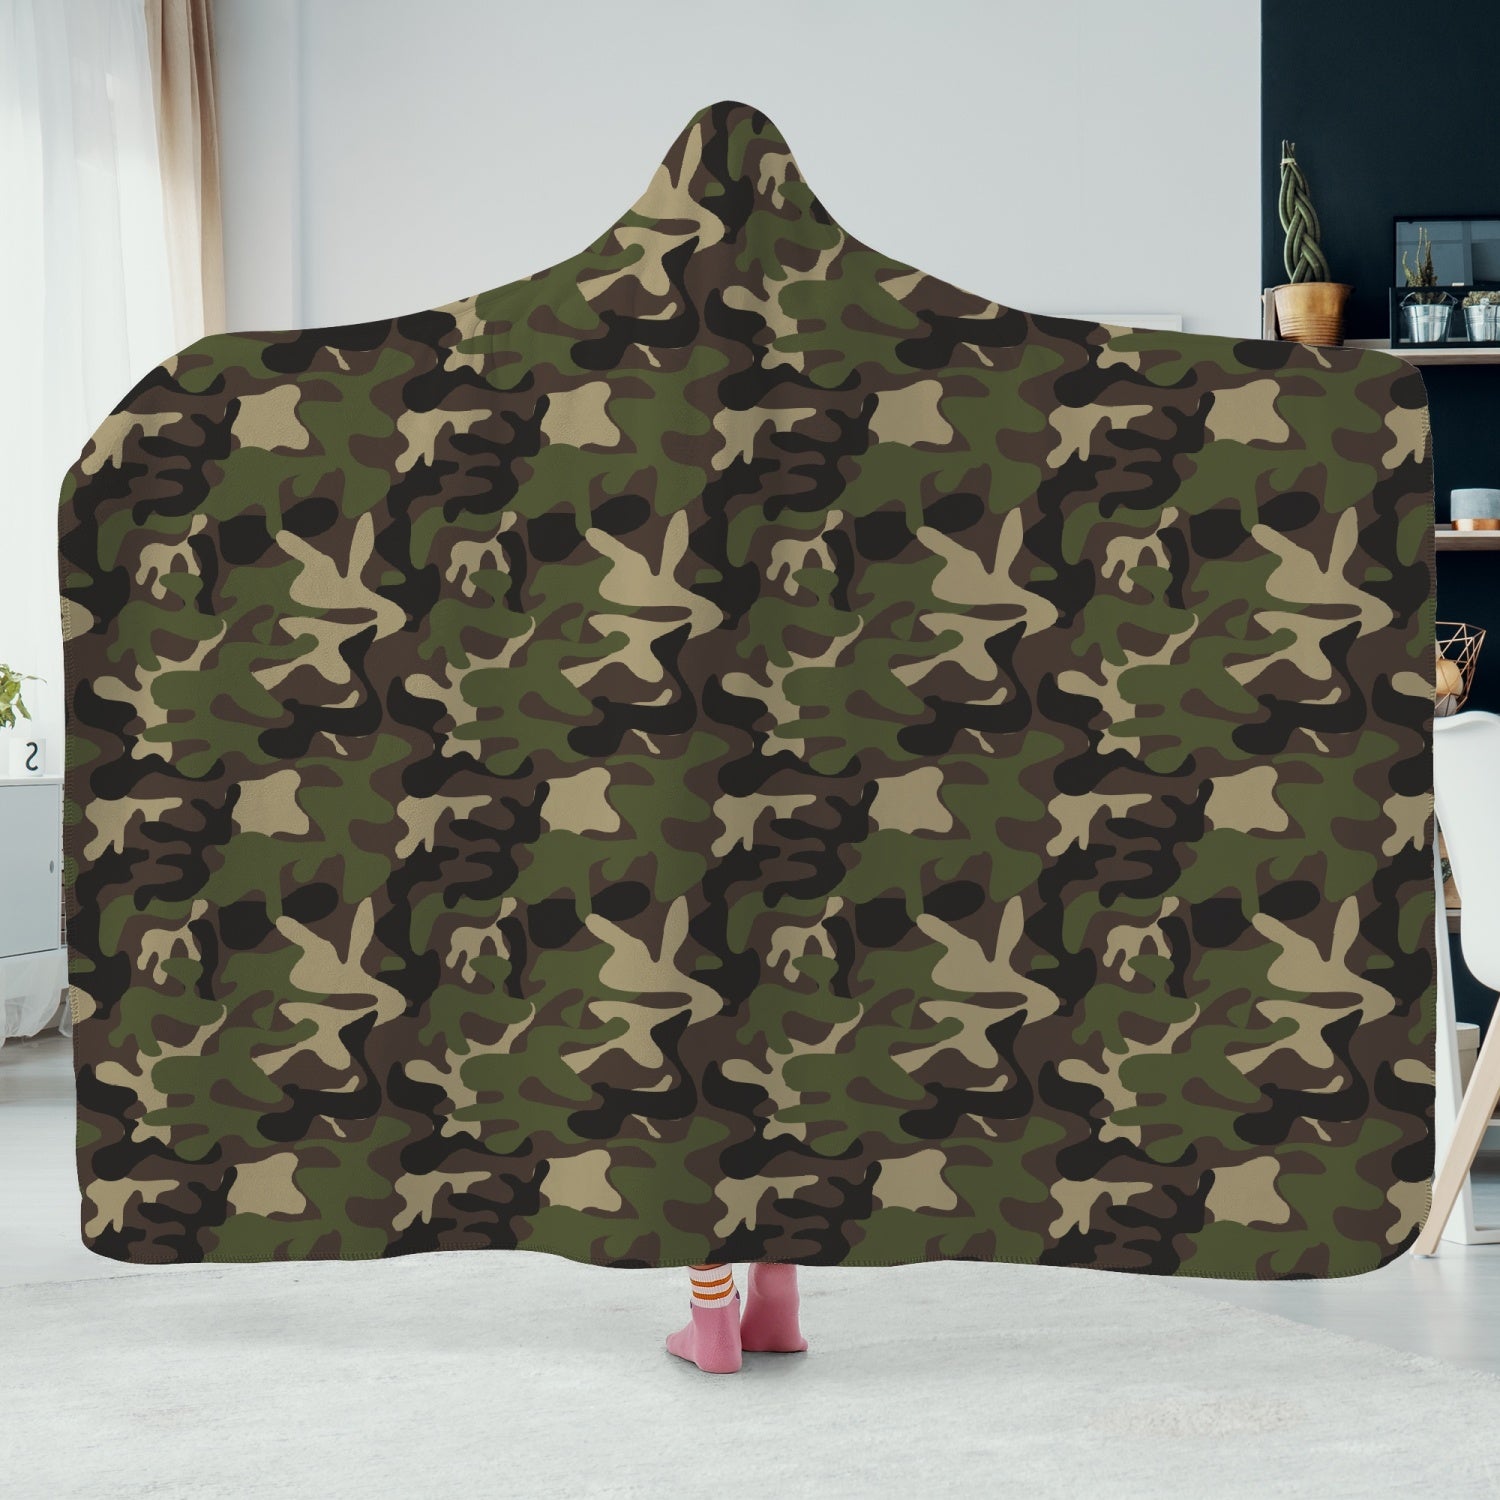 Camo Hooded Blanket, Green Camouflage Sherpa Fleece Soft Fluffy Cozy Warm Adult Men Women Kids Large Wearable with Hood Gift Starcove Fashion